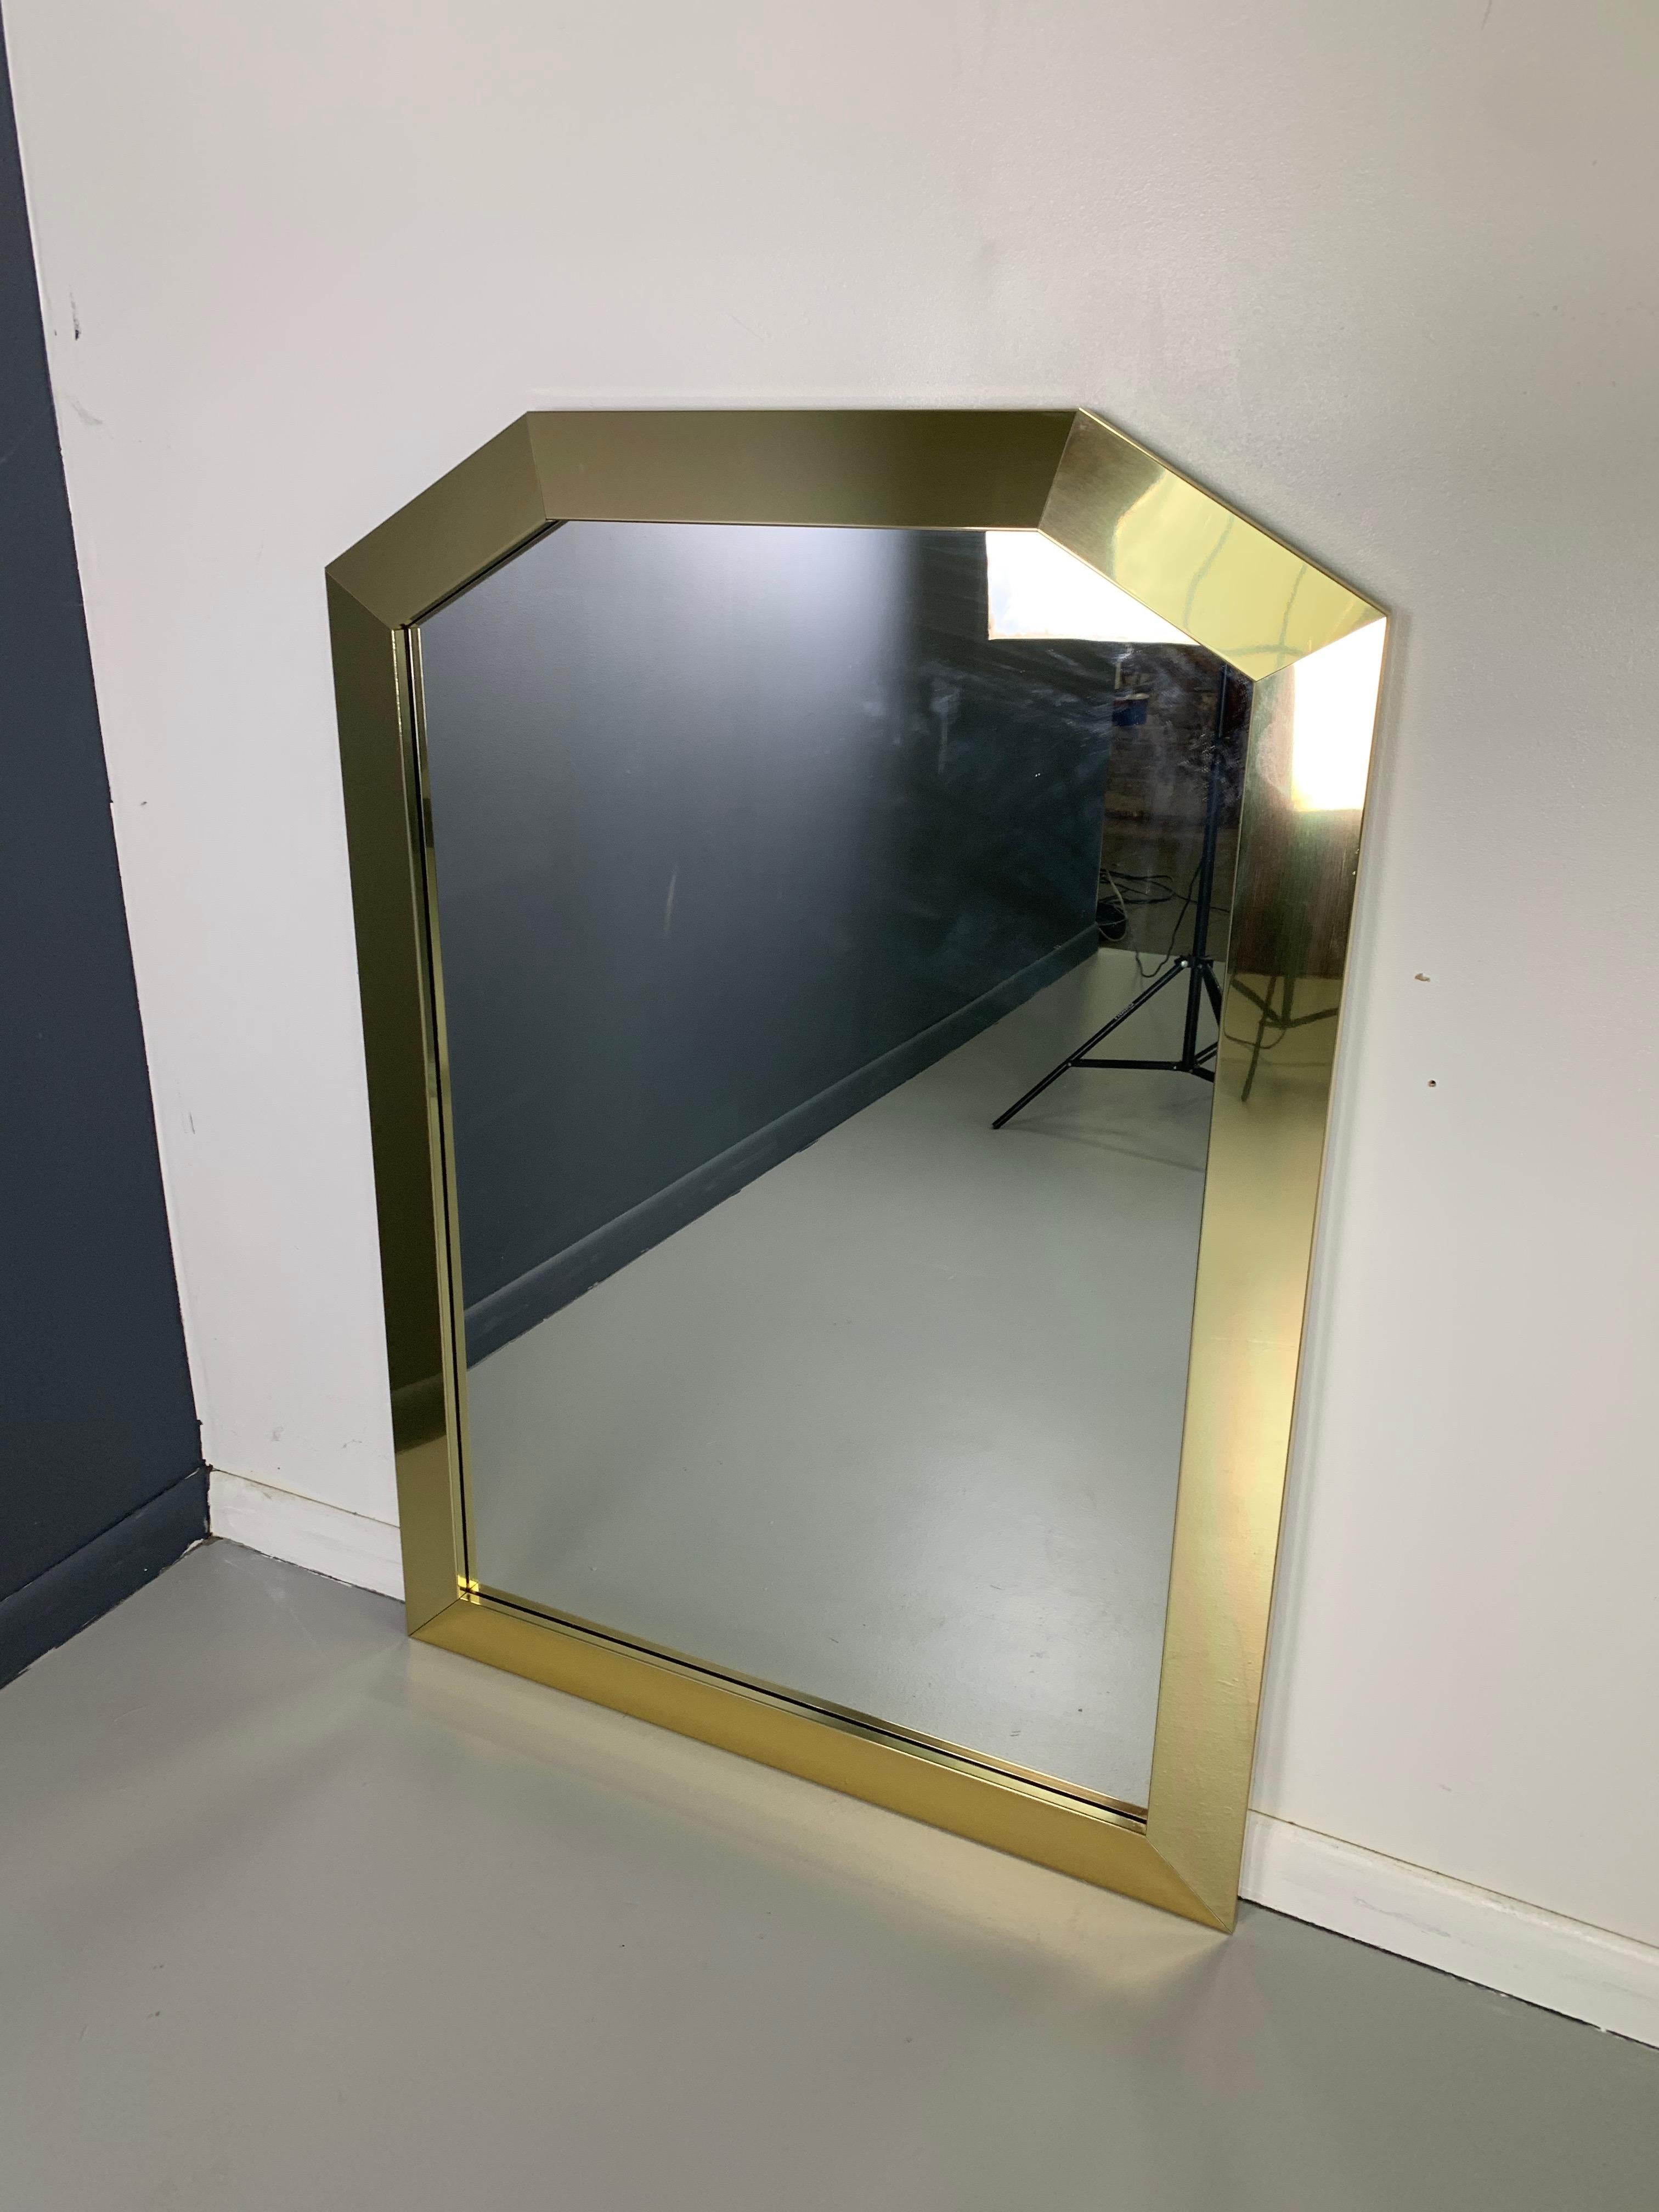 This impressive brass framed mirror has a thick brass frame and is made with wonderful quality, heavy and in great condition.

This mirror shows the influence of 1980s artists such as Paul Evans and Curtis Jere.